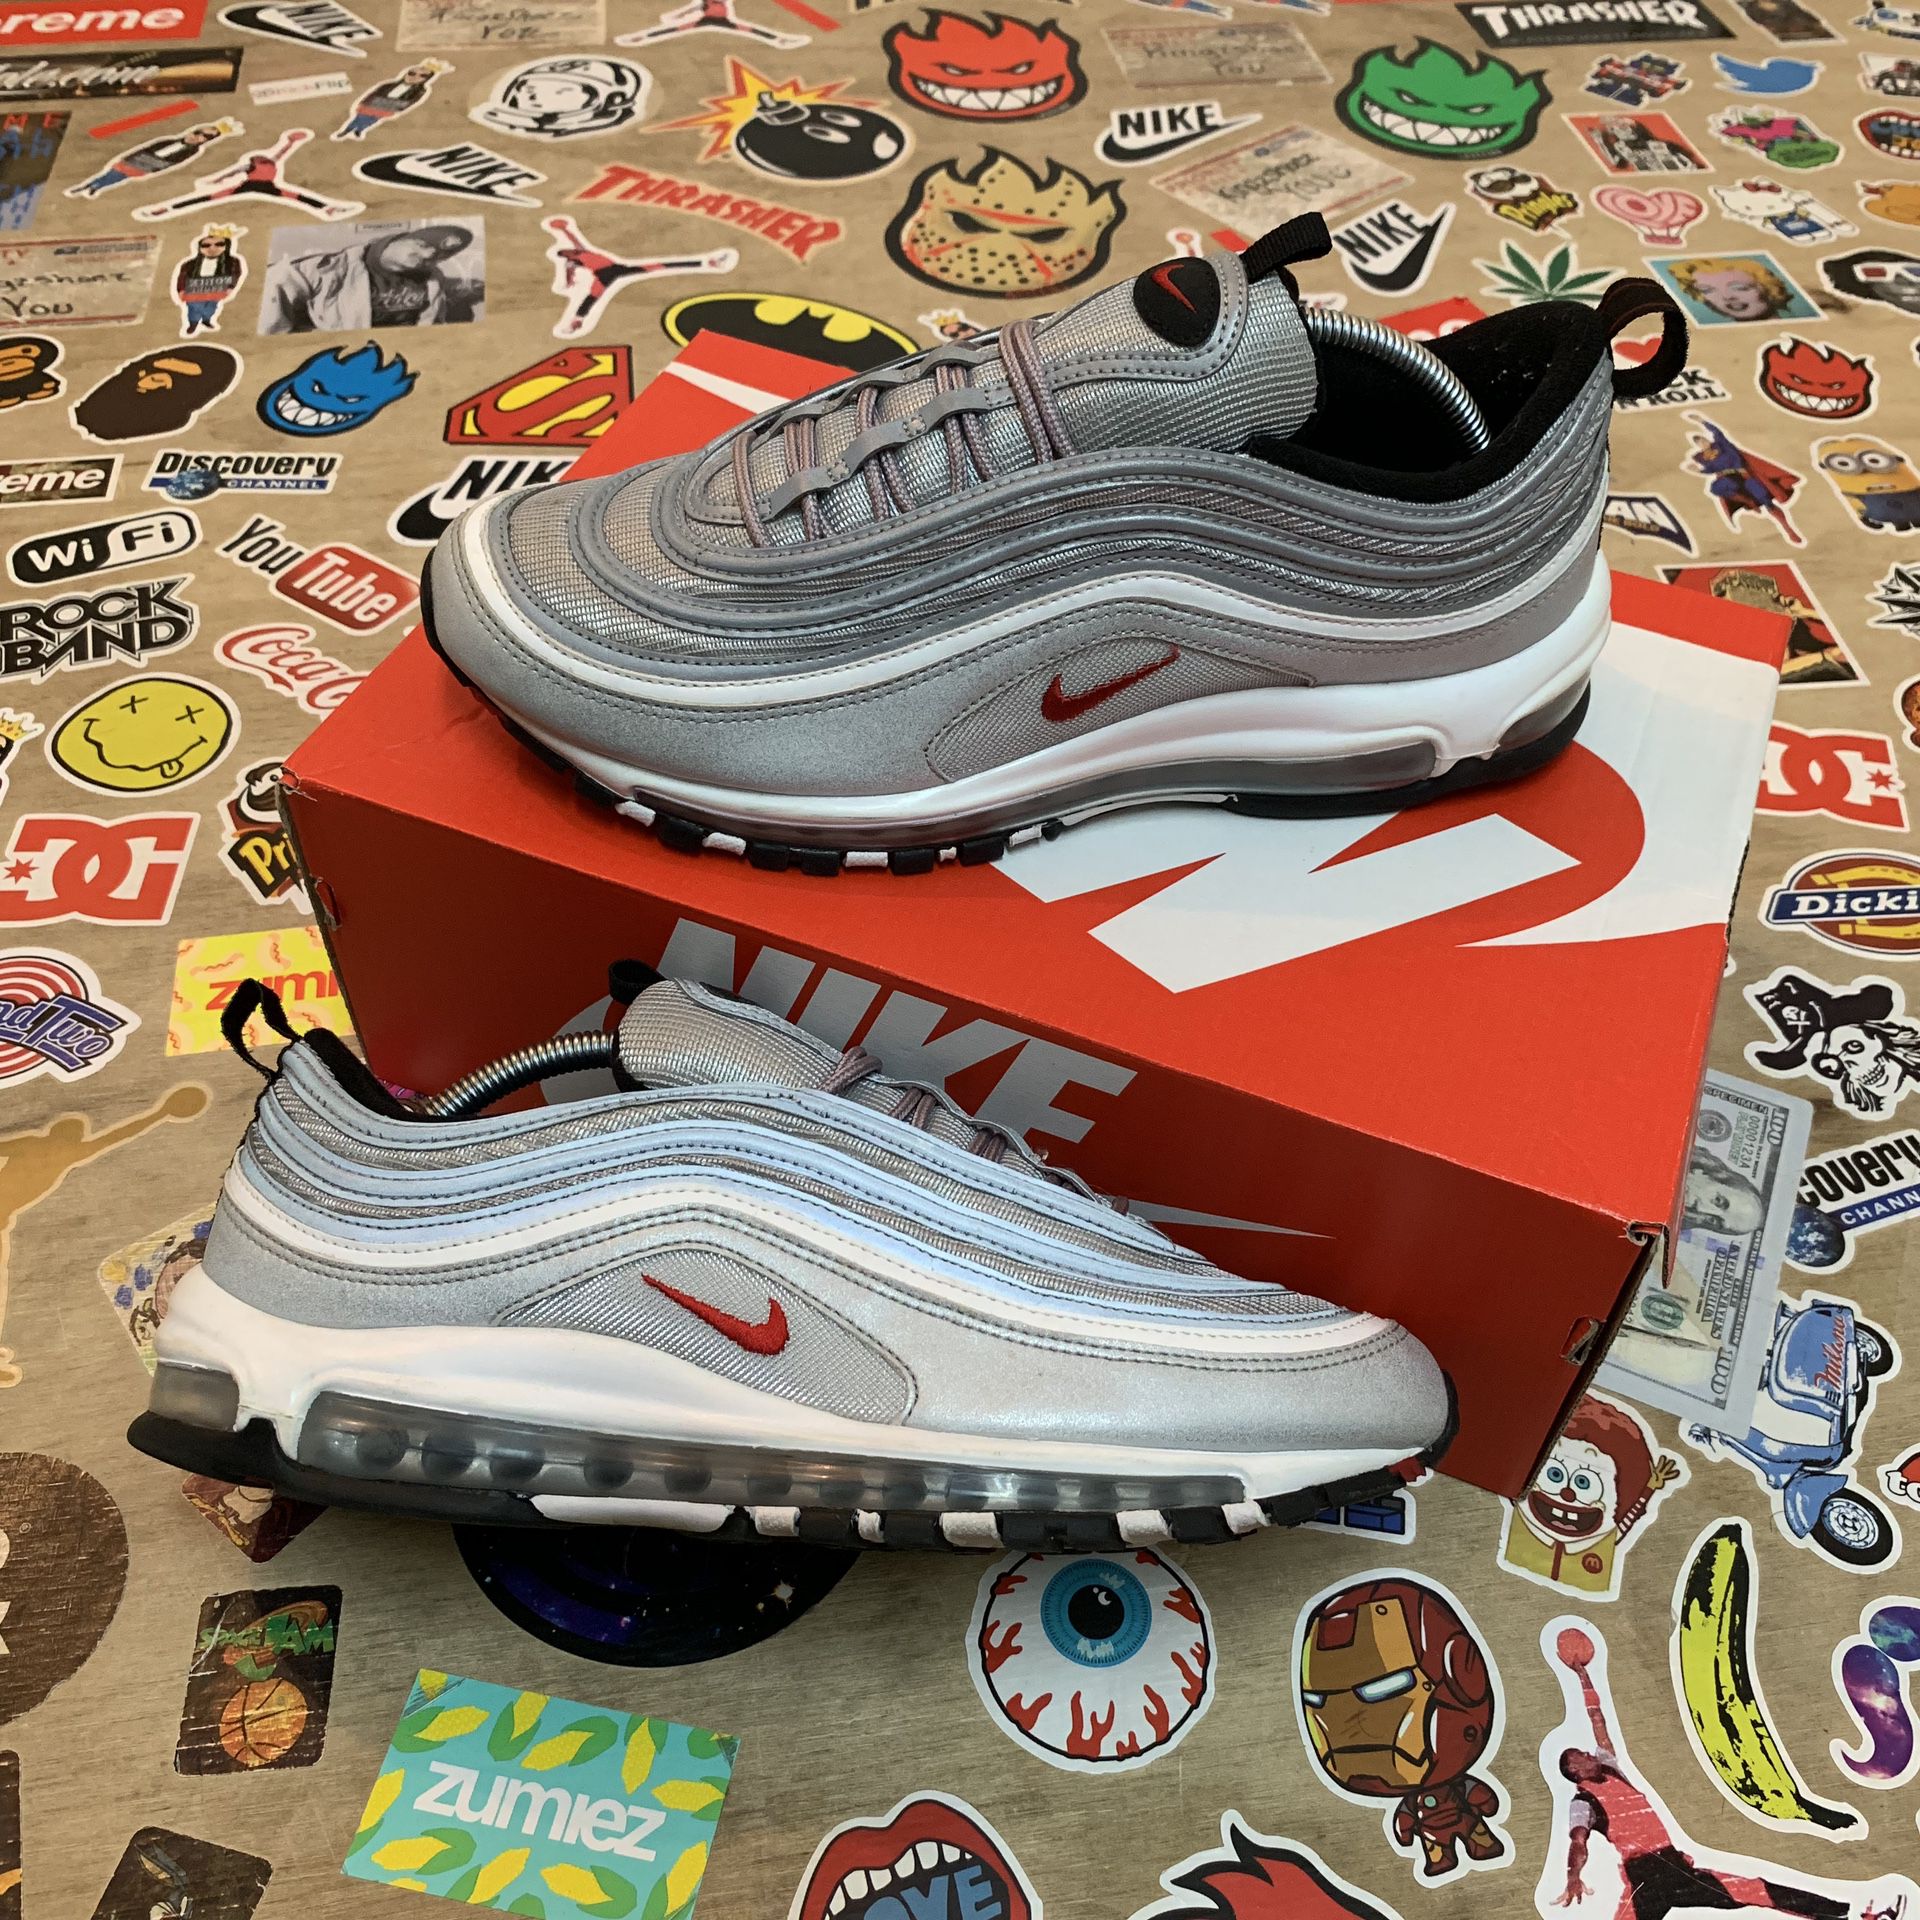 Nike Air Max 97 “Silver Bullets” (Size 11)